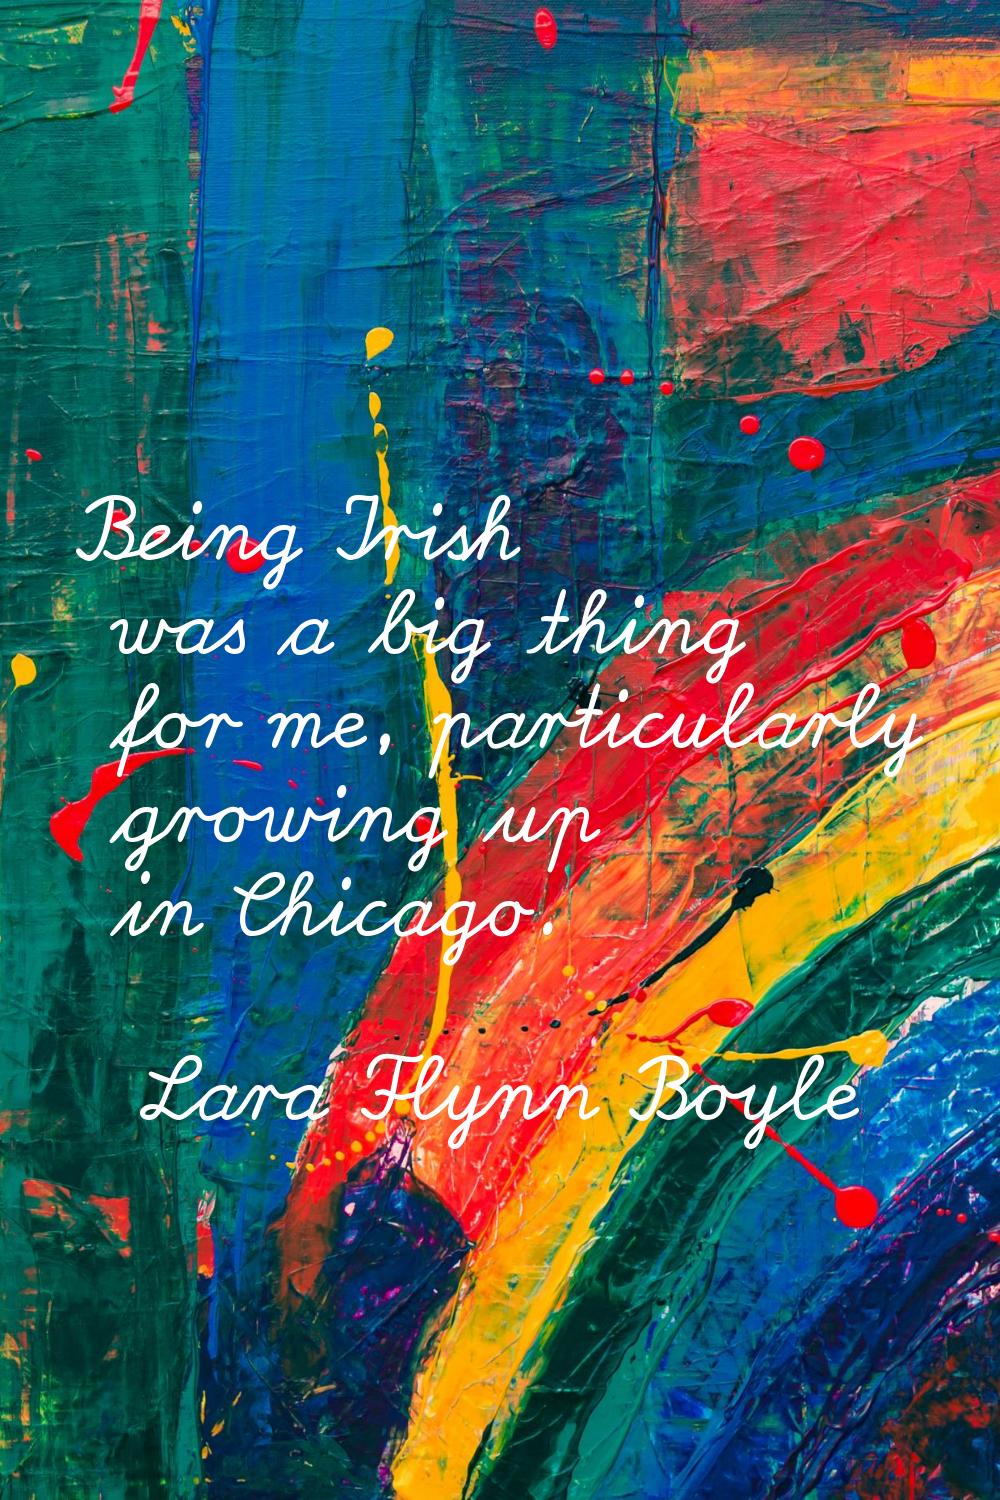 Being Irish was a big thing for me, particularly growing up in Chicago.